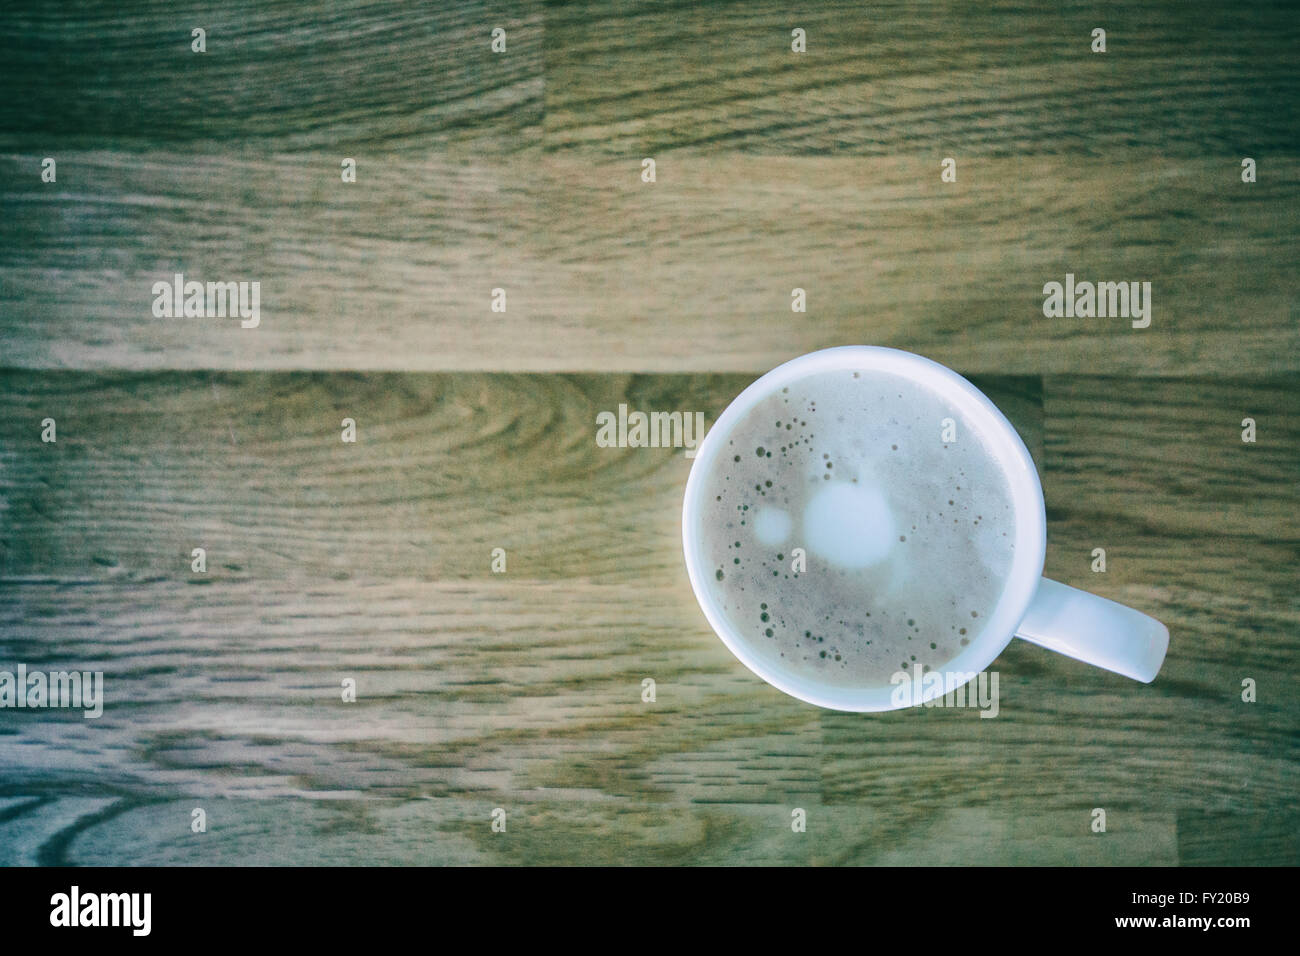 Colour image of a single cup of coffee on a wooden table. Stock Photo